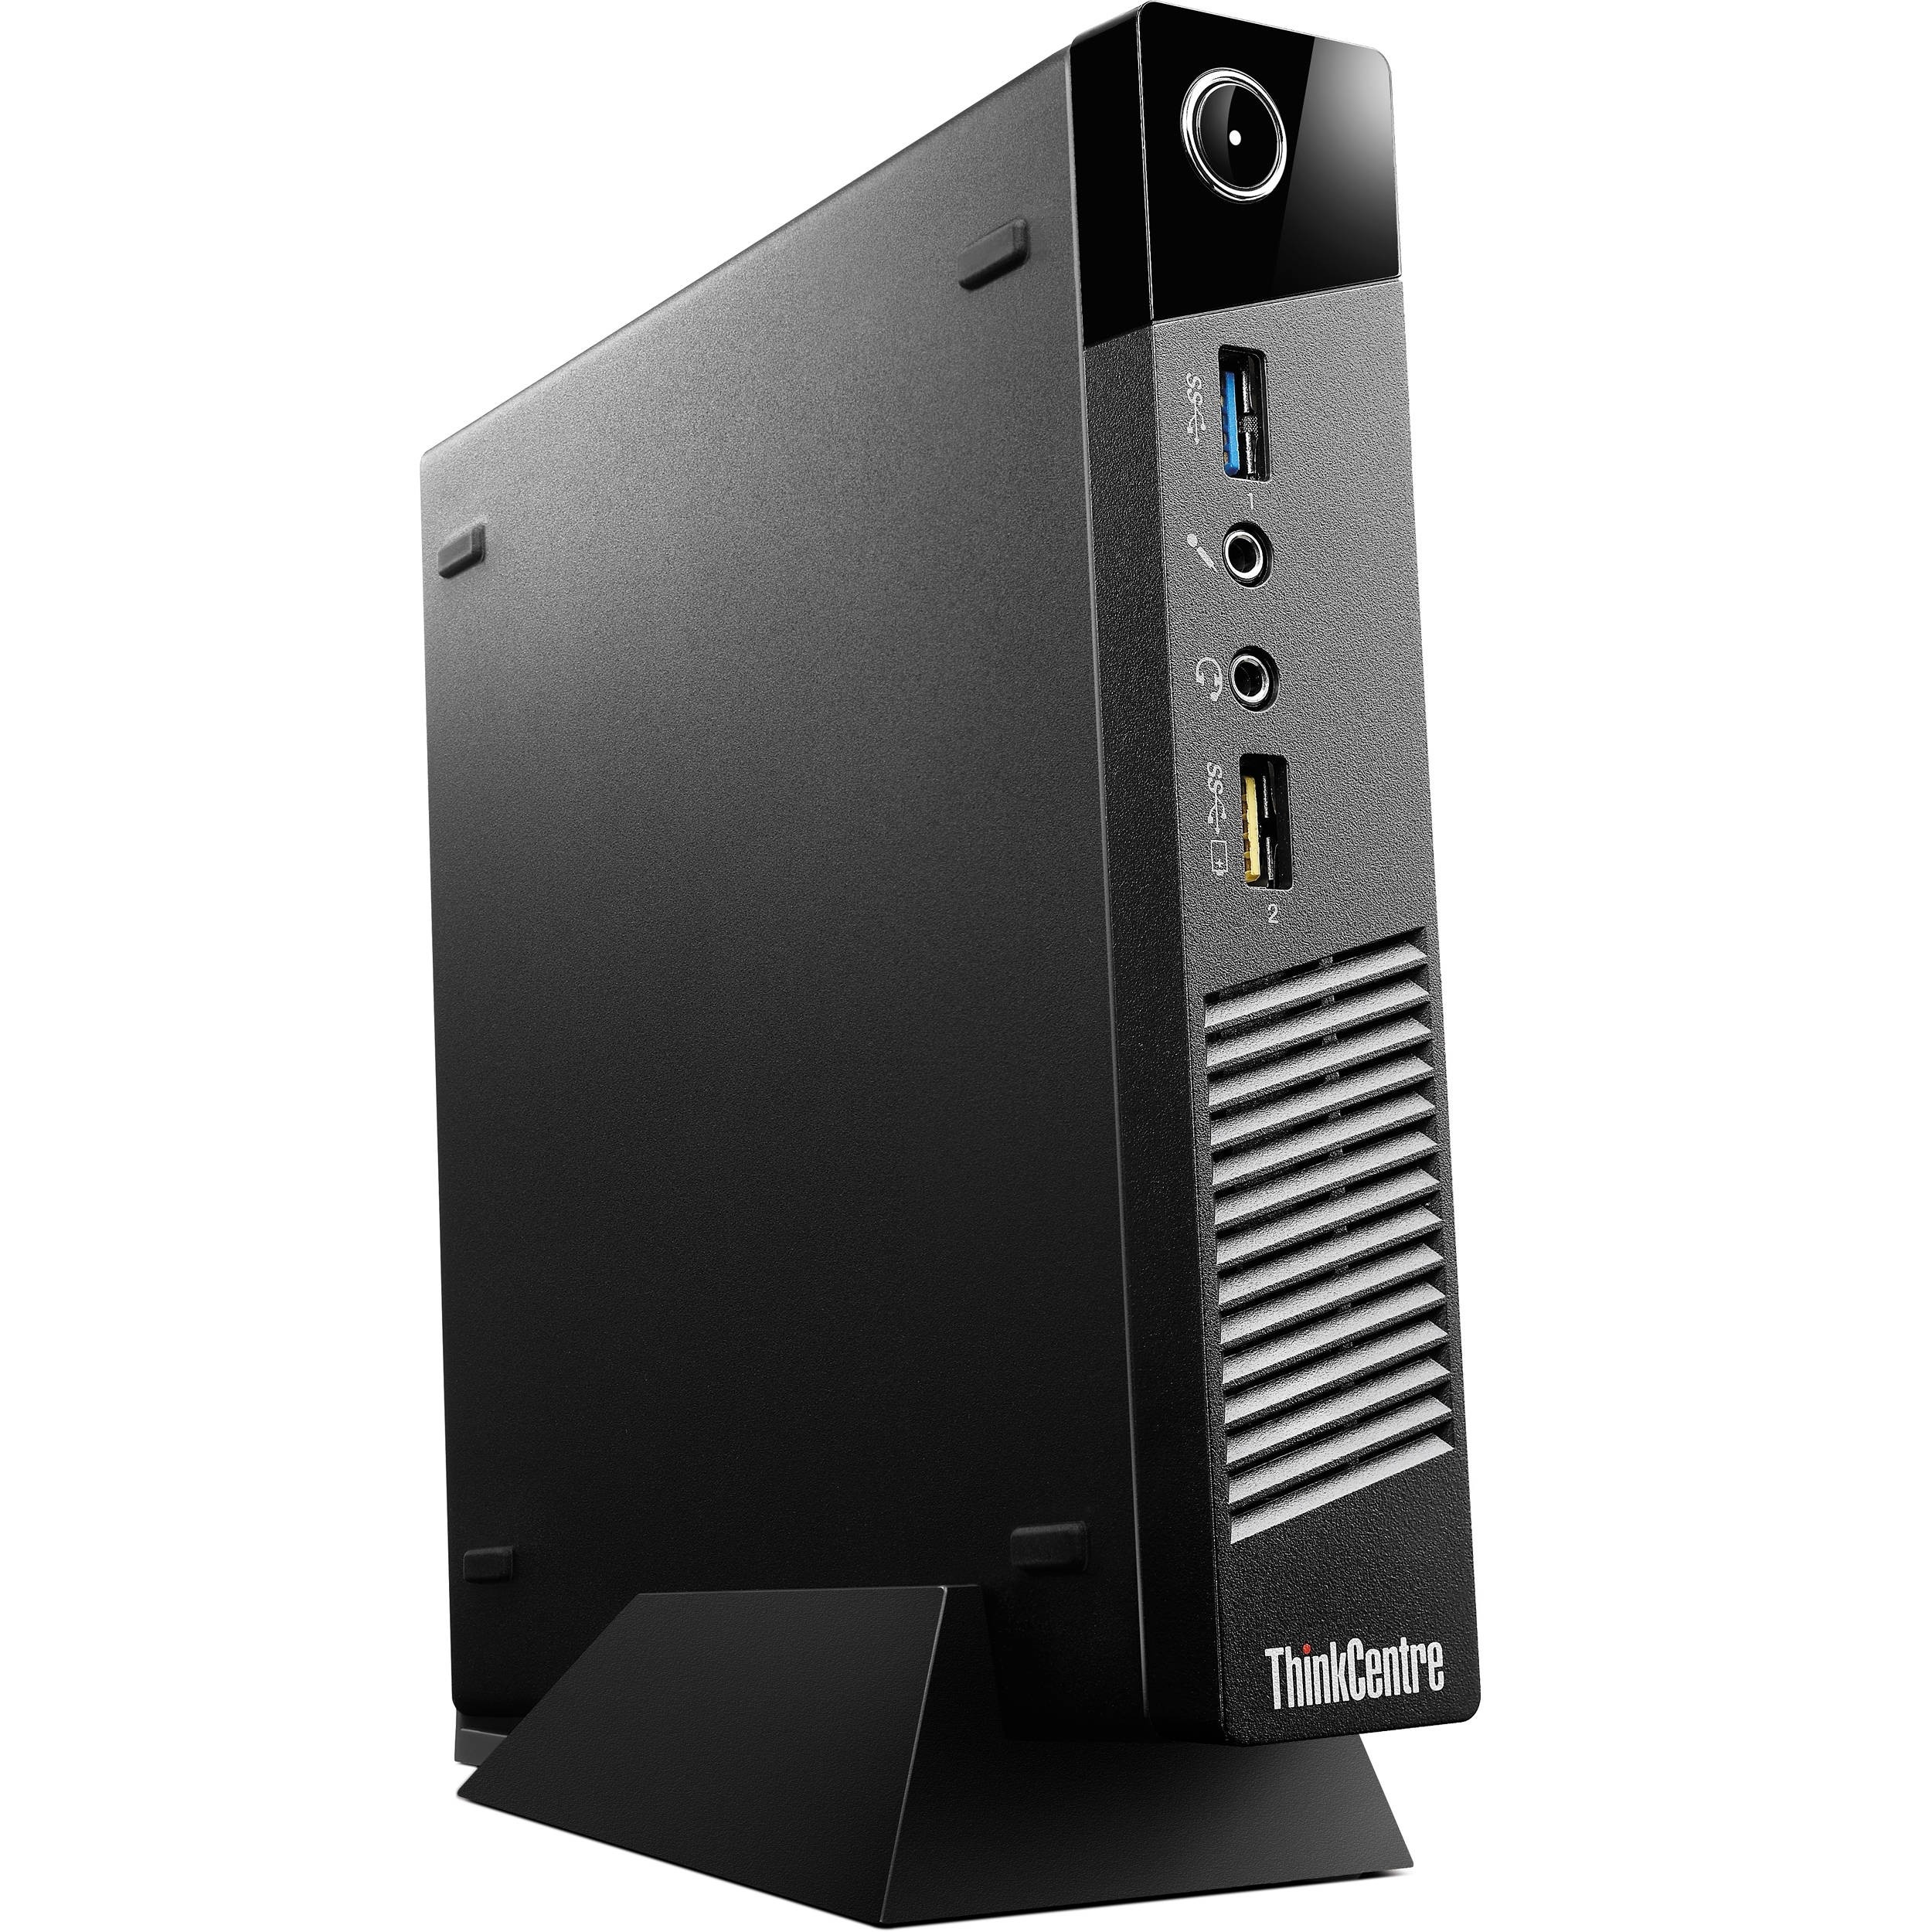 Lenovo ThinkCentre M73 Tiny Front Side-Left Image